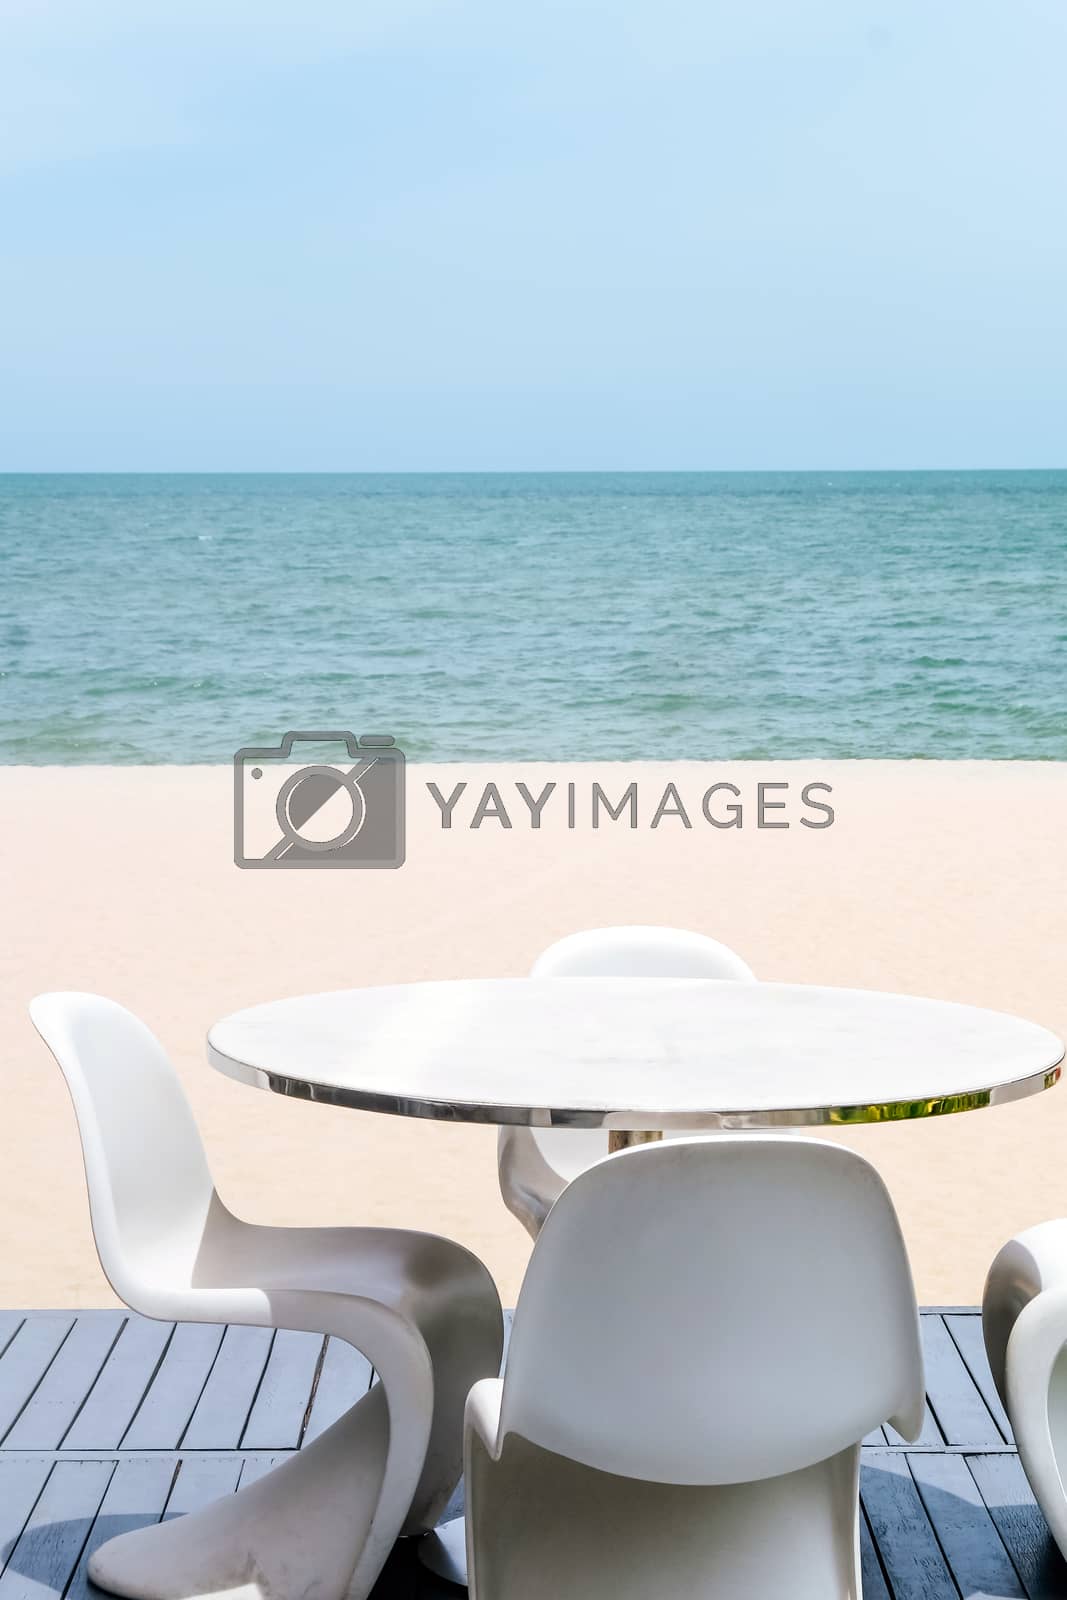 Royalty free image of Image of Sea View Dinning Table by ponsulak